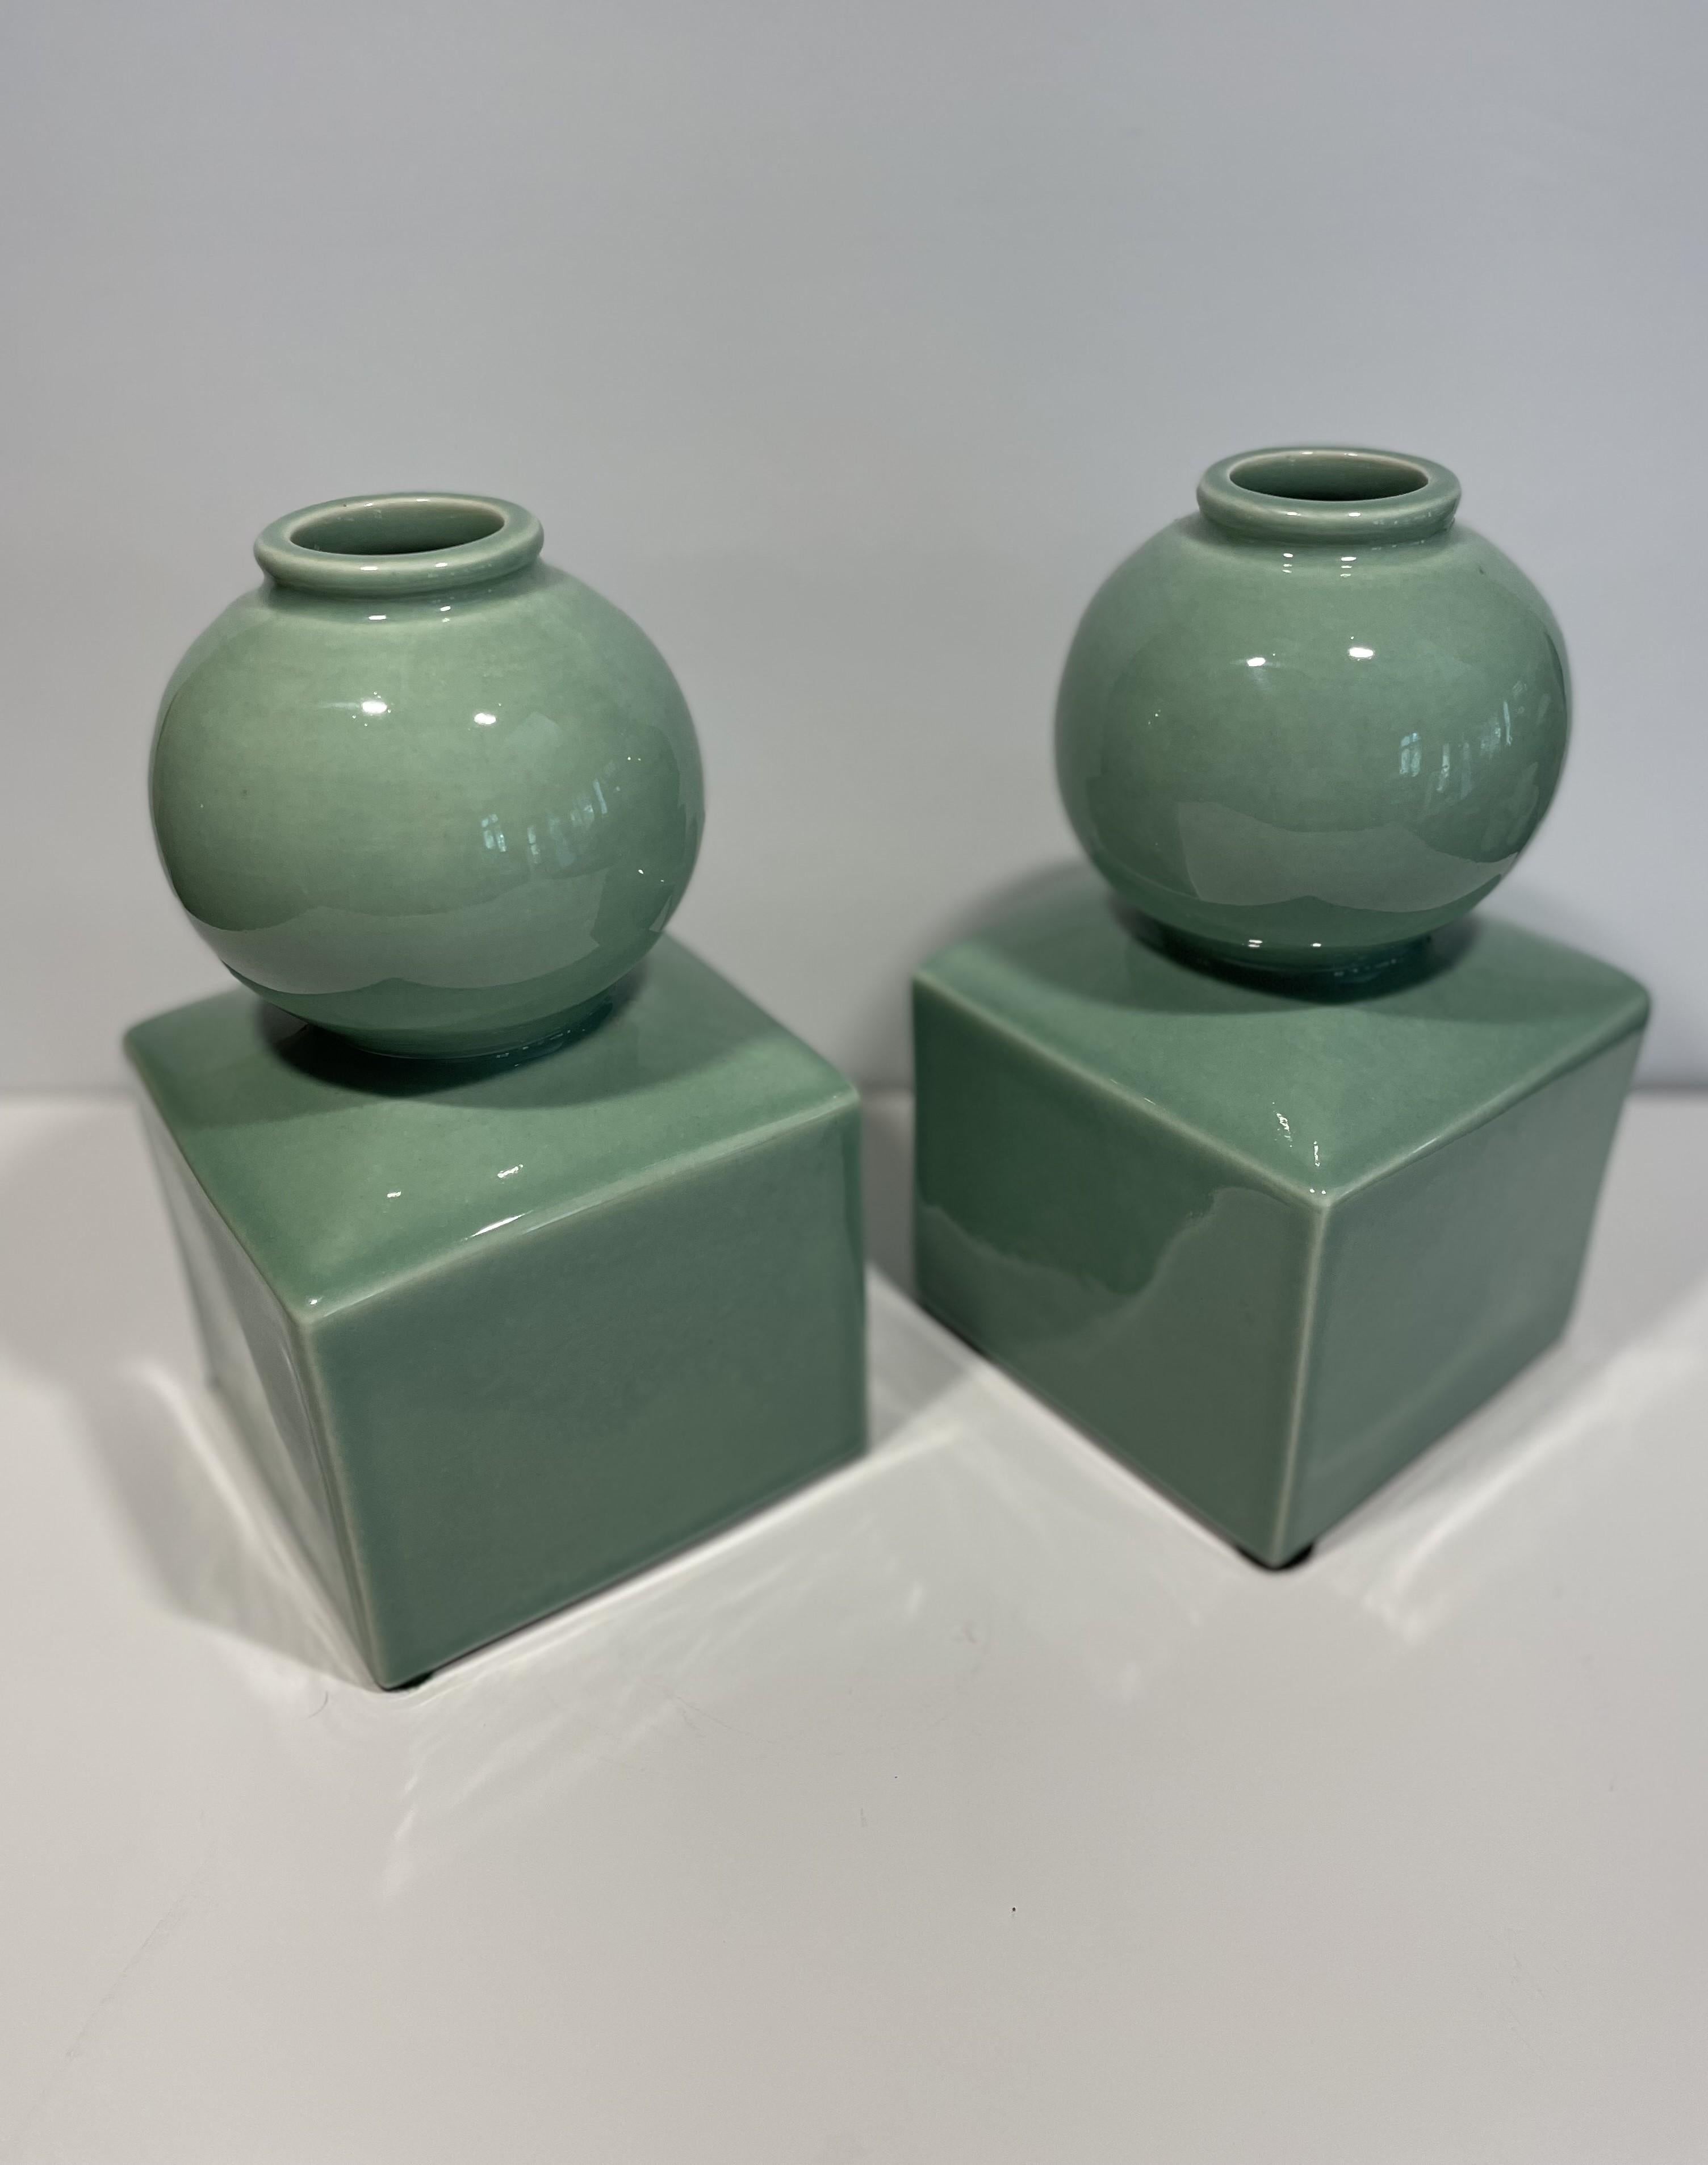 Contemporary Celadon Ceramic Vases or Bookends Attributed to Serena & Lily -- A Pair For Sale